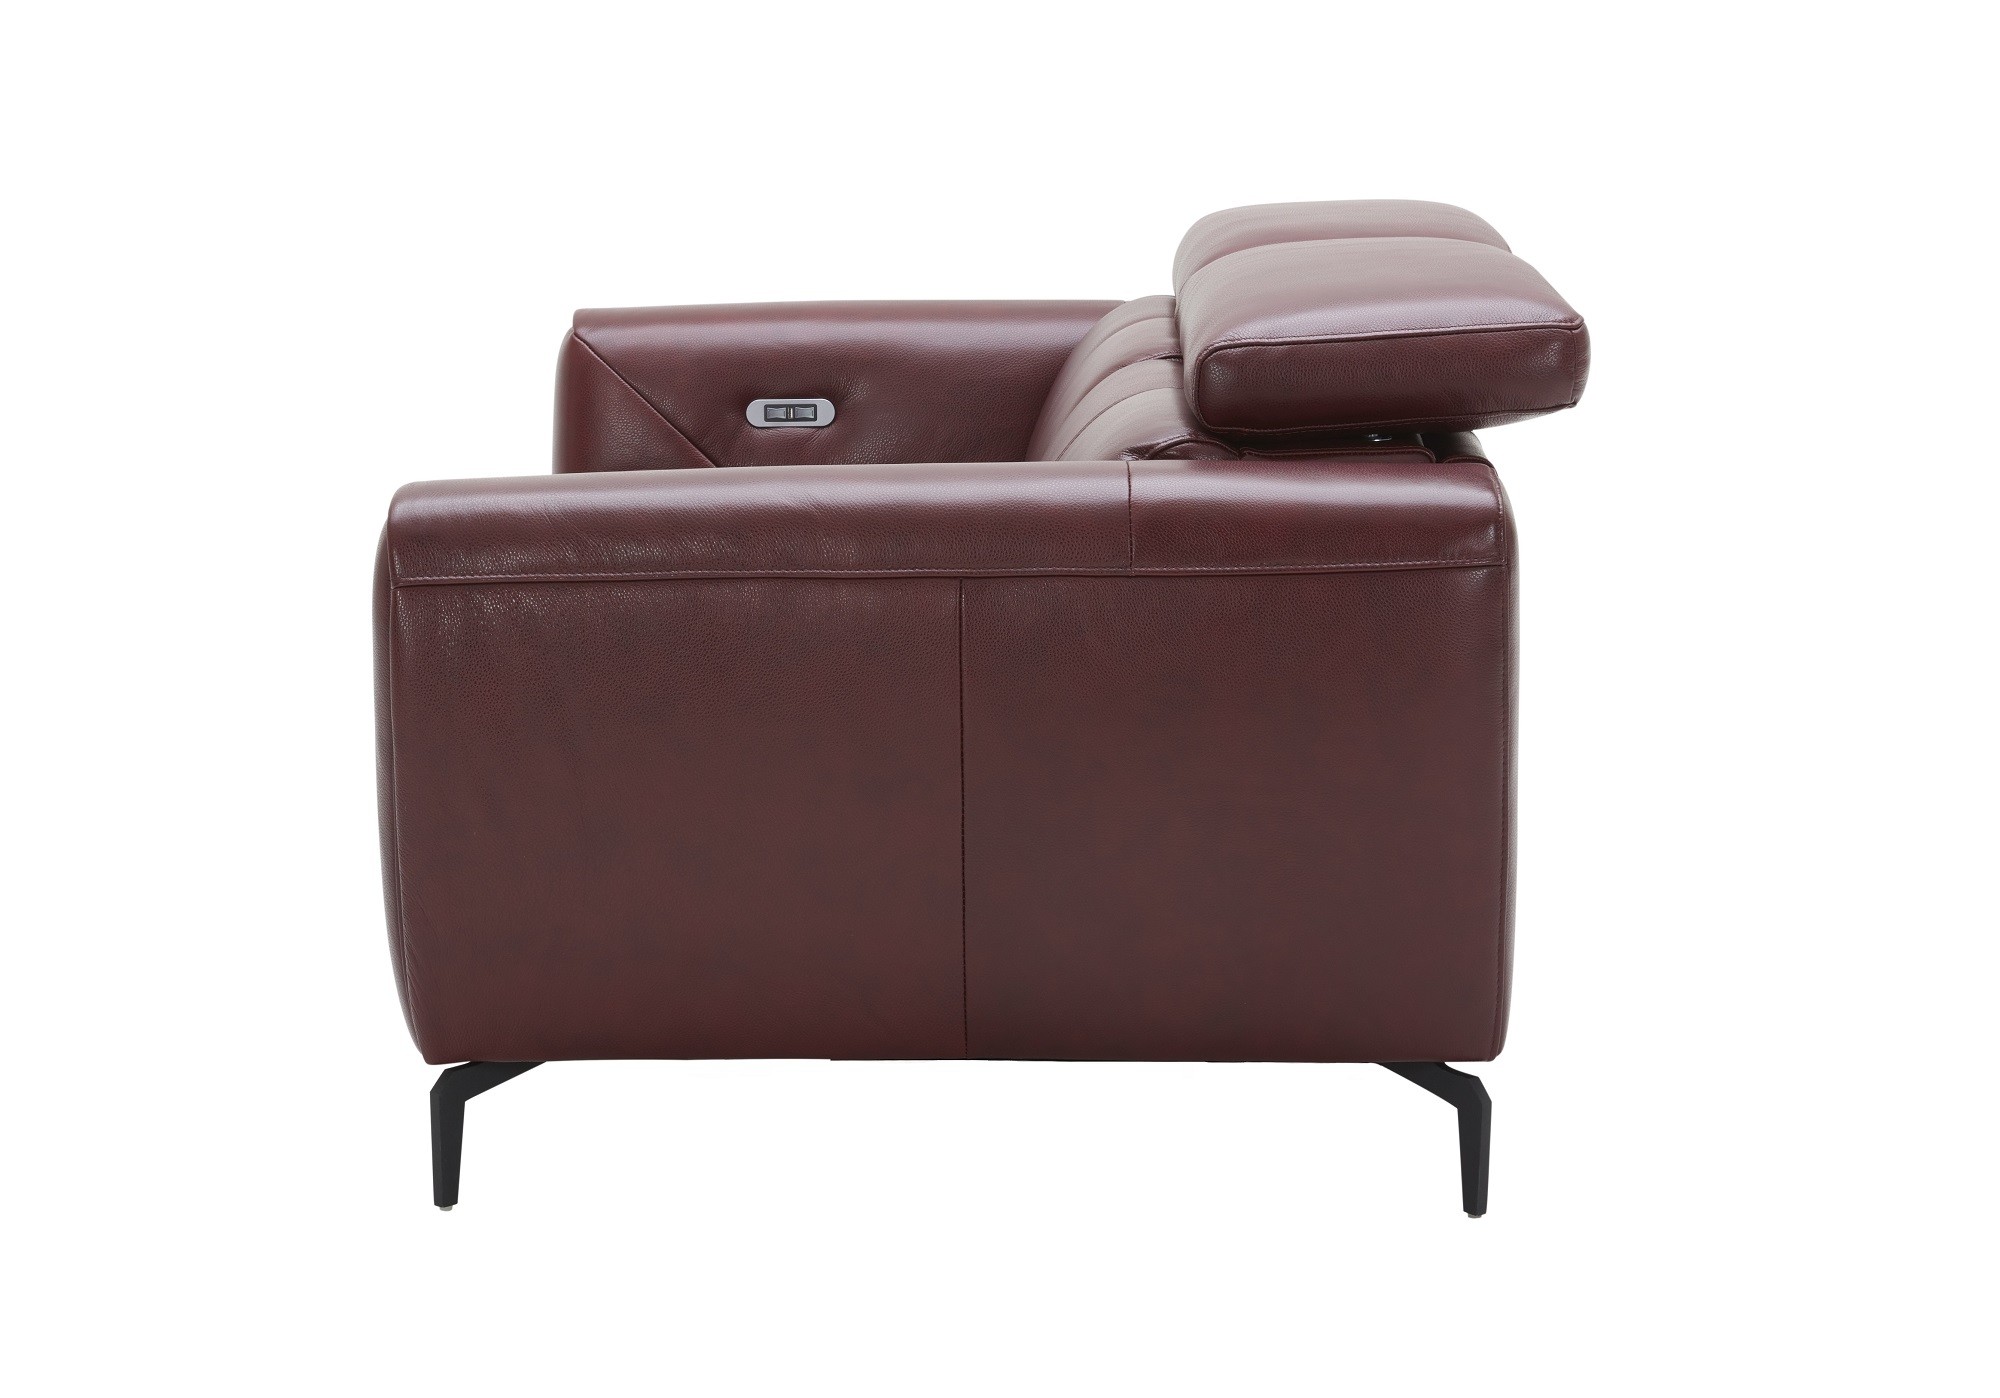 Top-Grain Leather Living Room Sofas